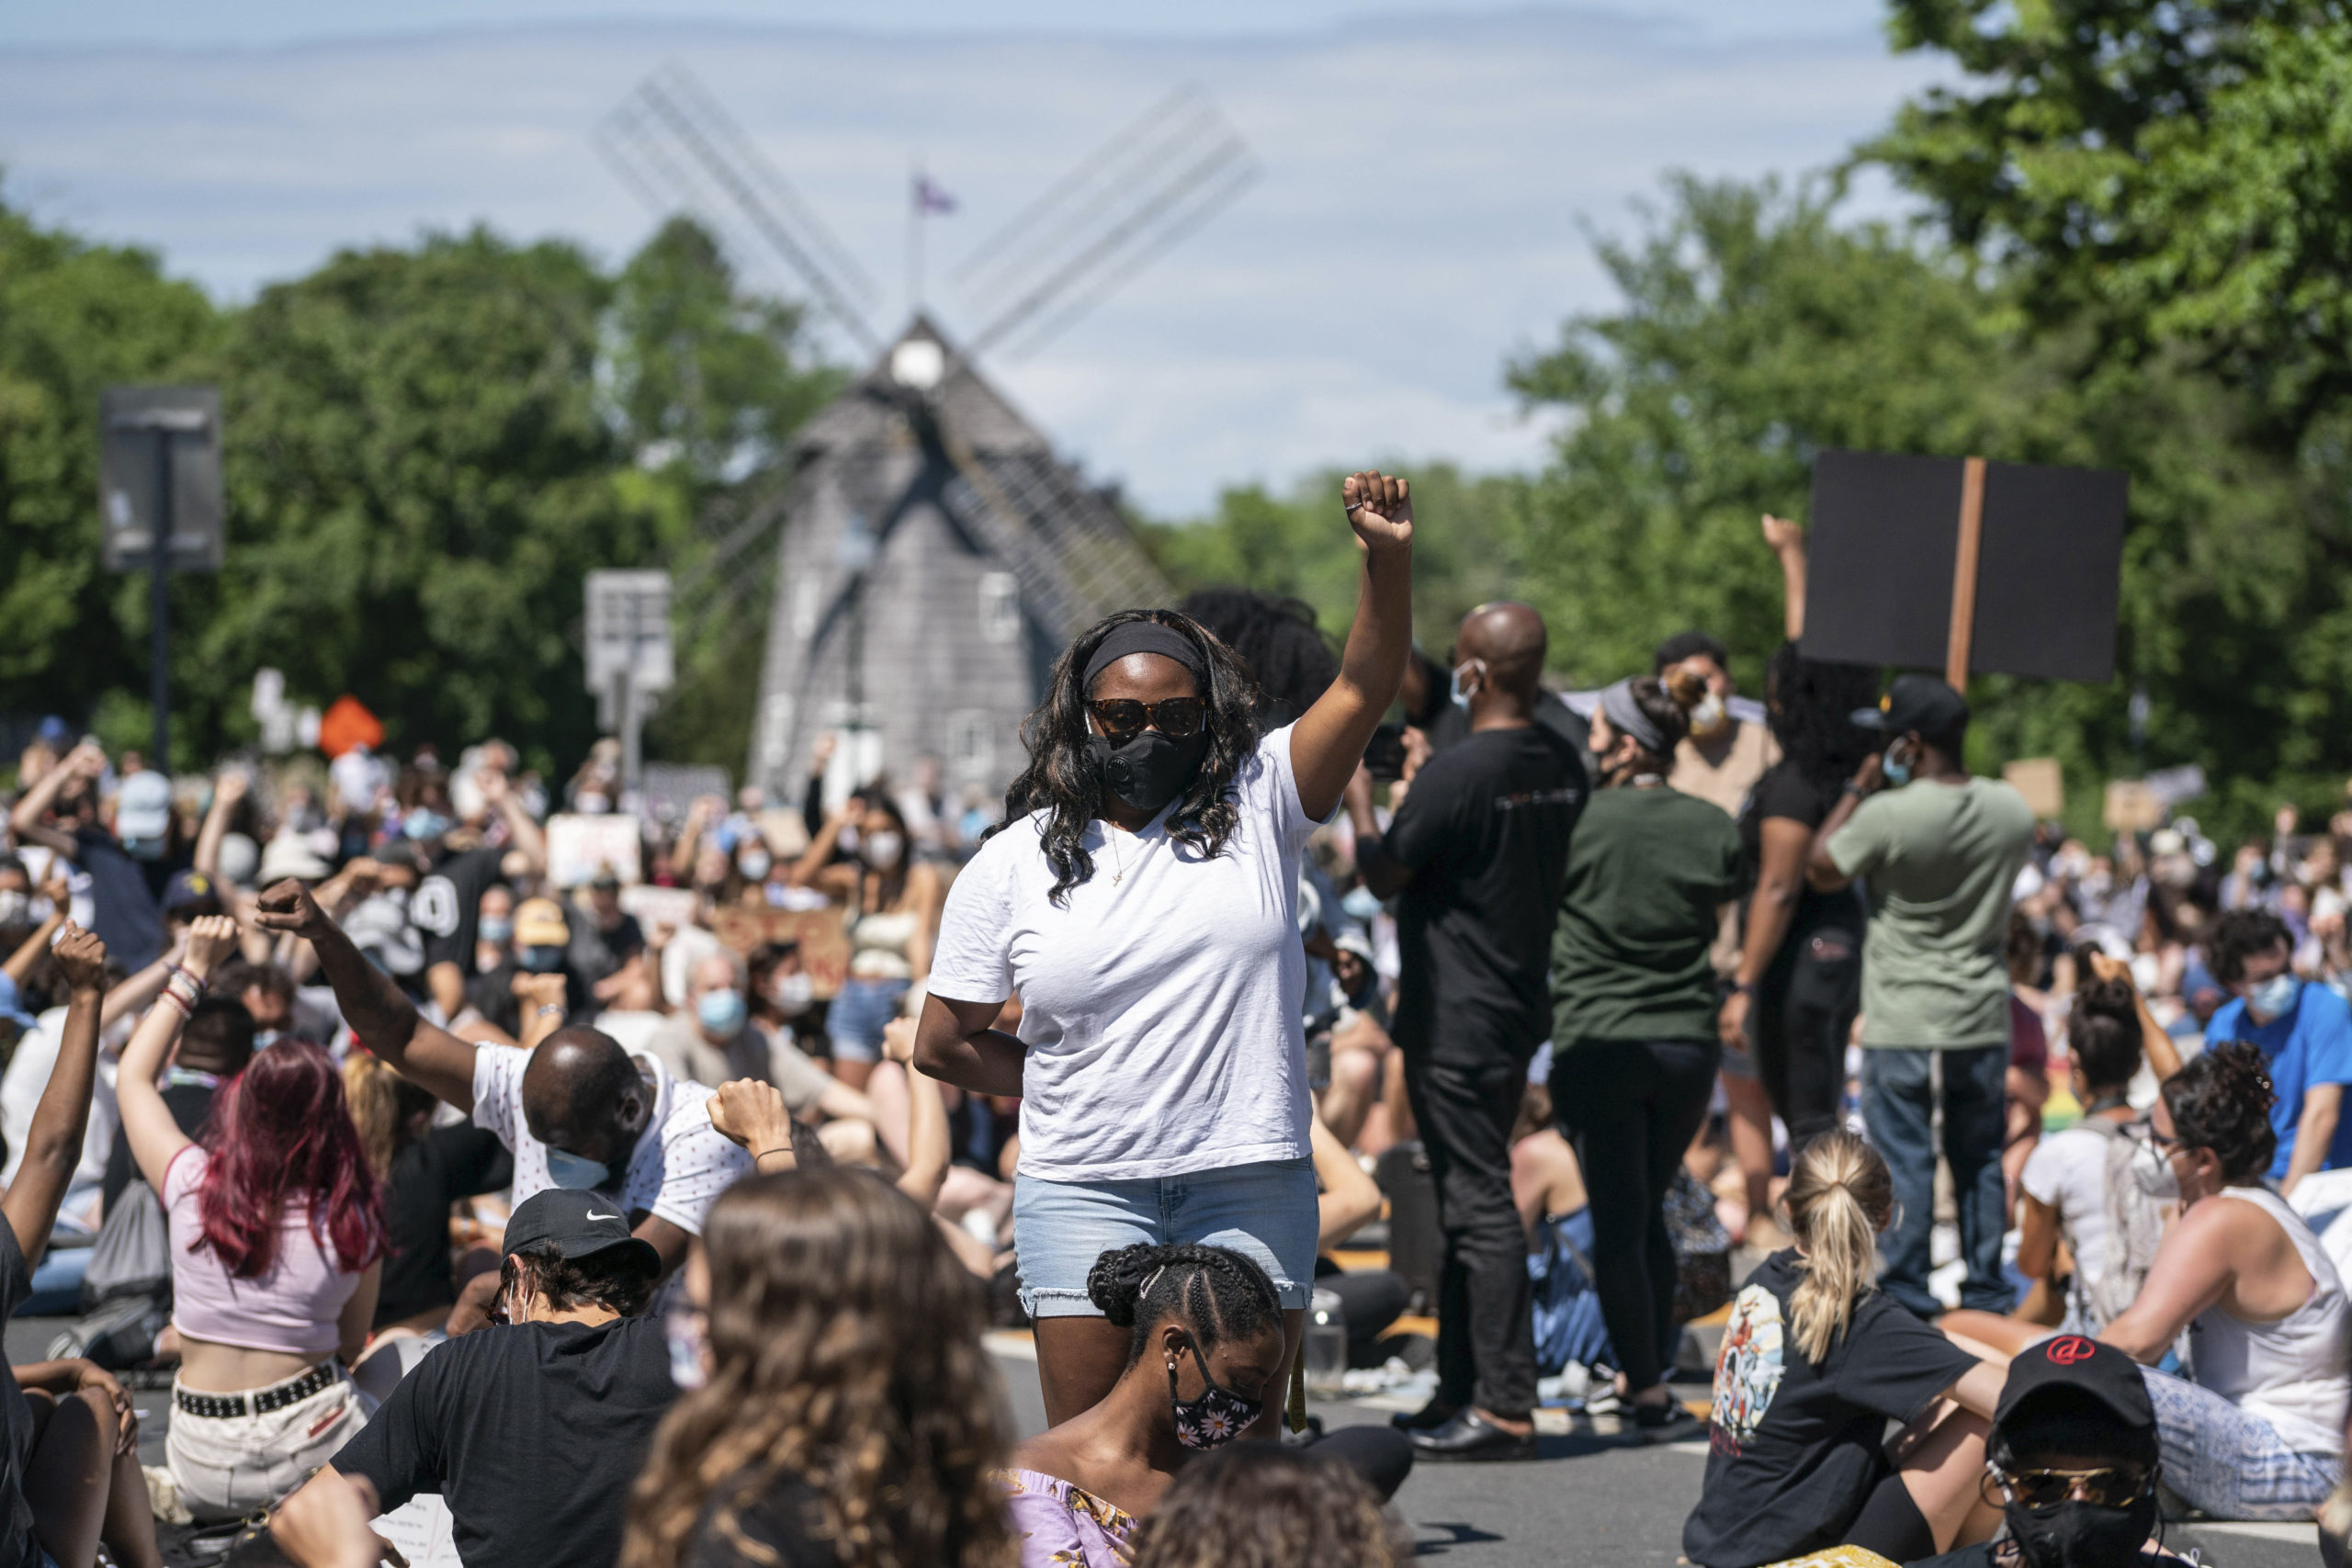 Hundreds of people gathered in East Hampton Saturday afternoon to decry white supremacy and police brutality, and to demand systemic change in the United States. BY BEN PARKER